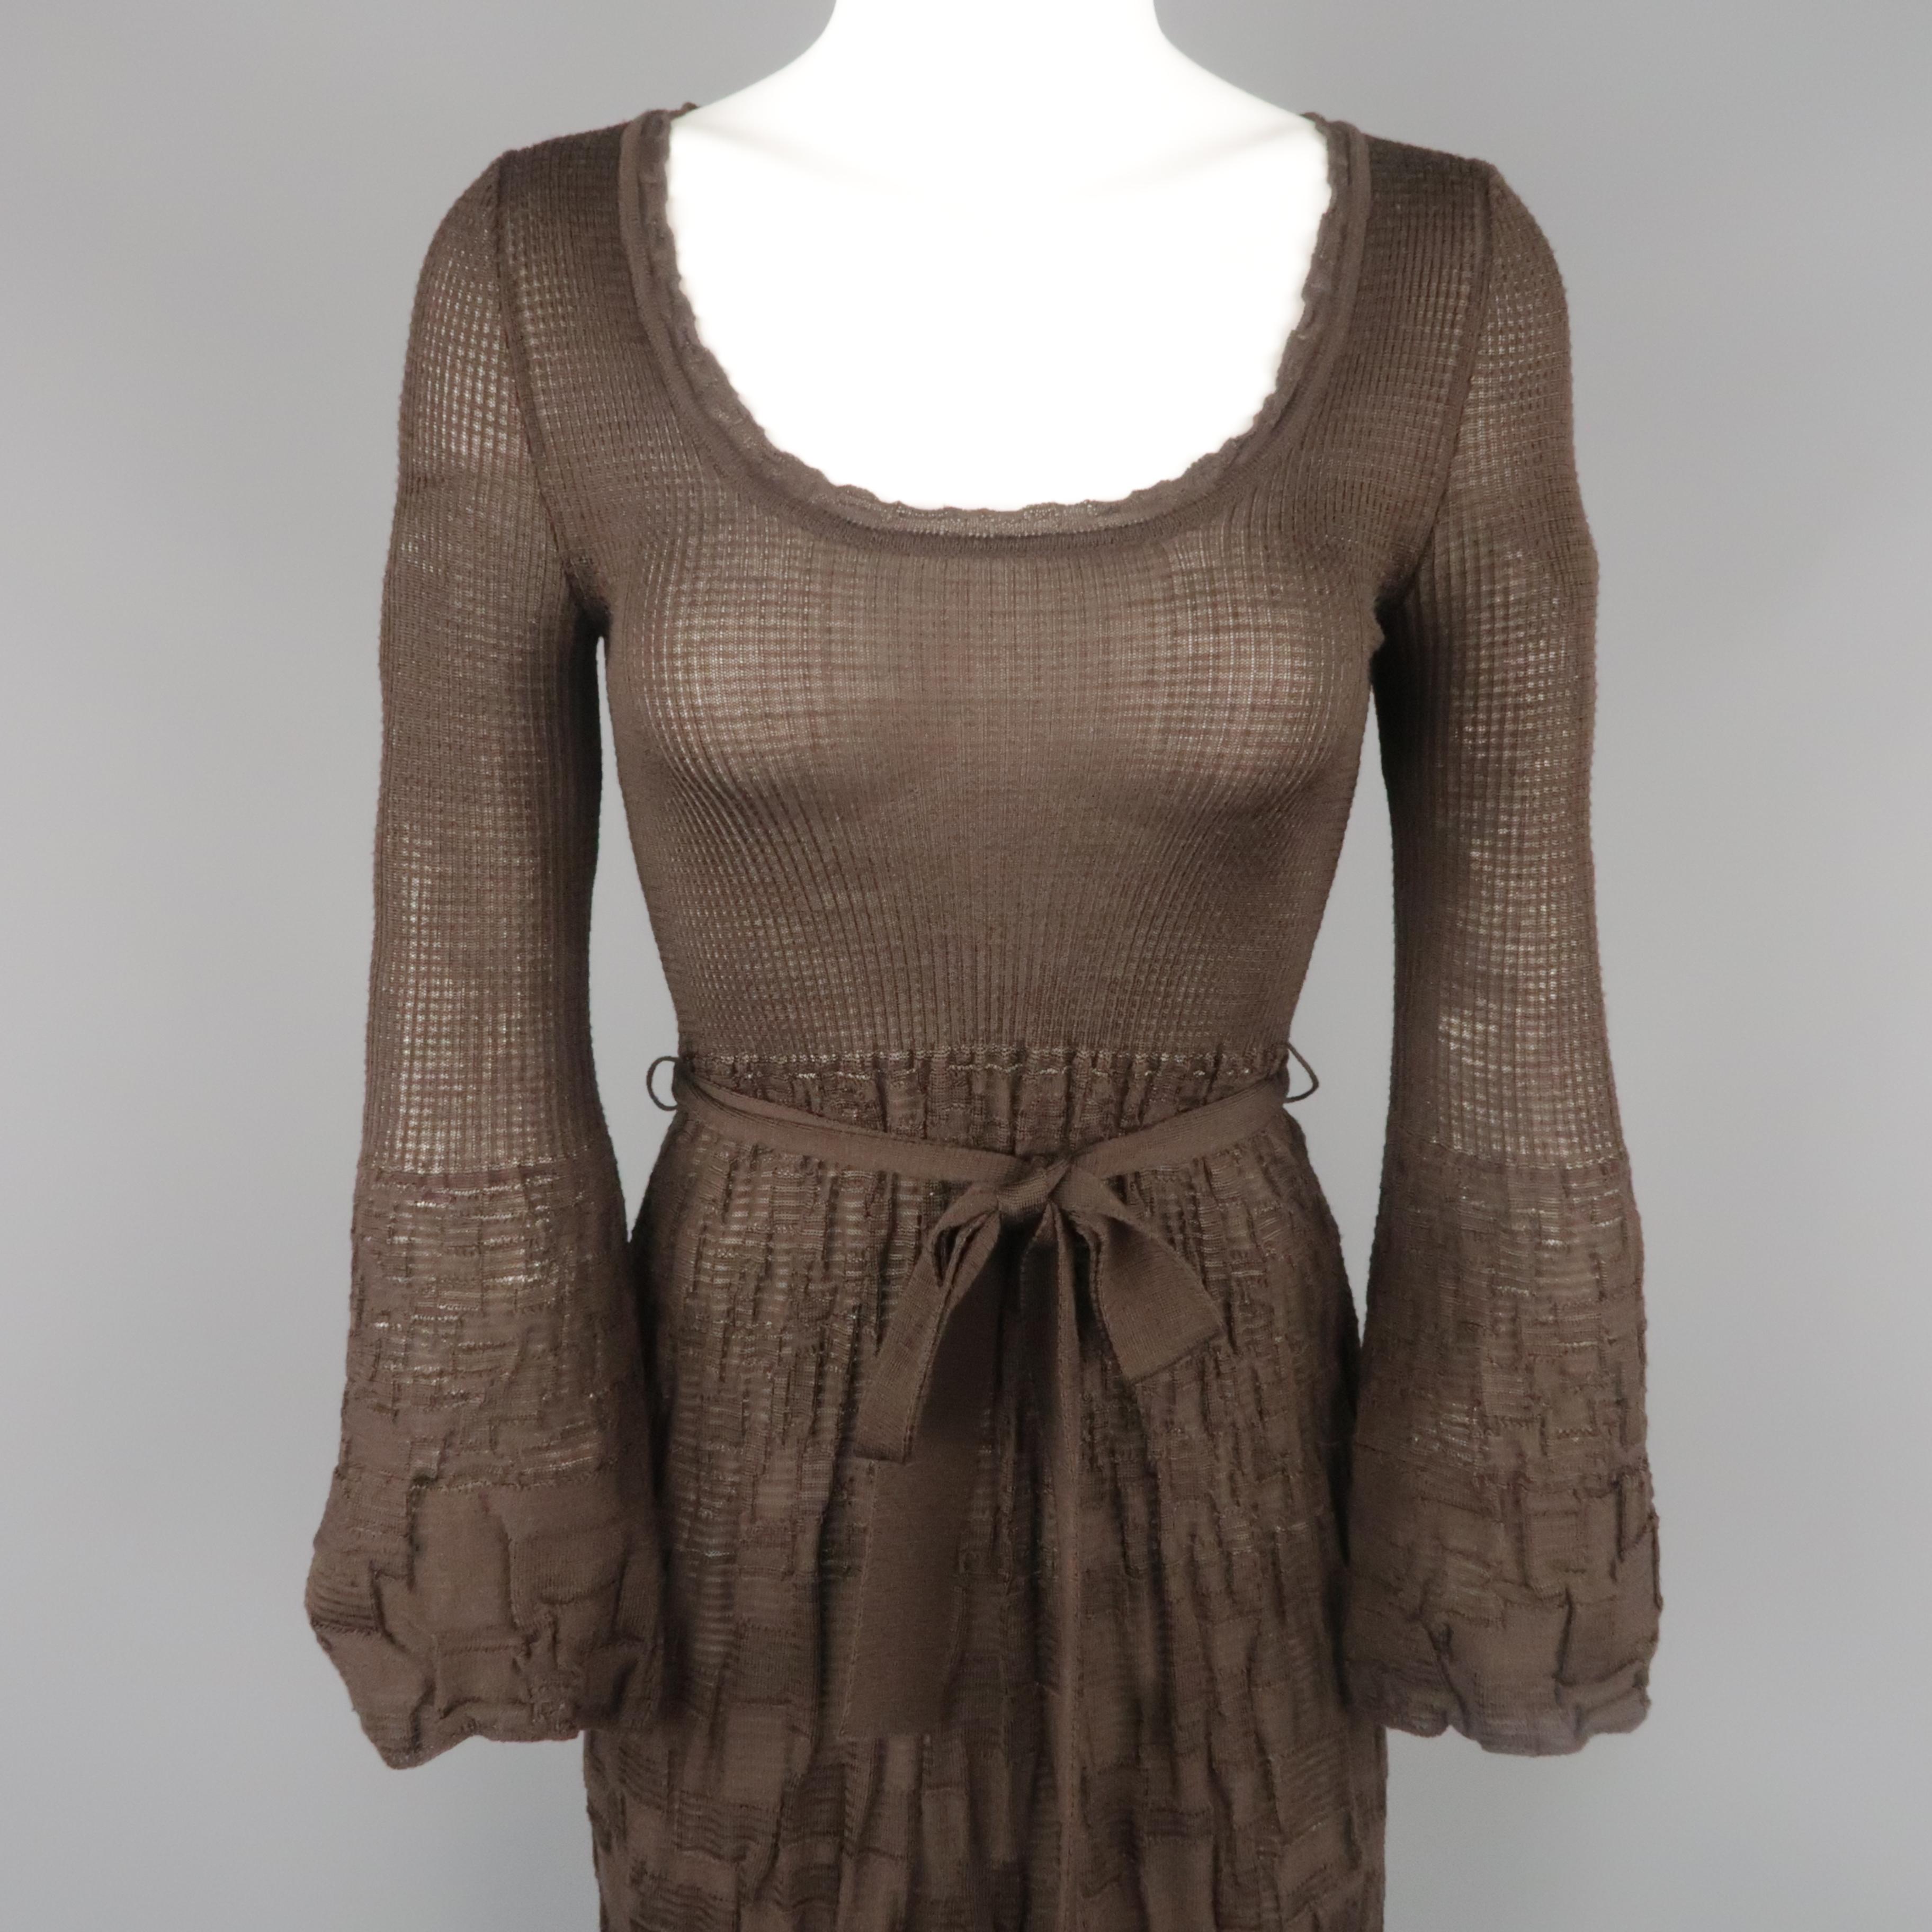 M by MISSONI dress comes in brown wool viscose blend textured stretch knit with a scoop neck, long bell sleeves, and ft flair A line skirt silhouette with tie belt. Made in Italy.
 
Excellent Pre-Owned Condition.
Marked: IT 38
 
Measurements:
